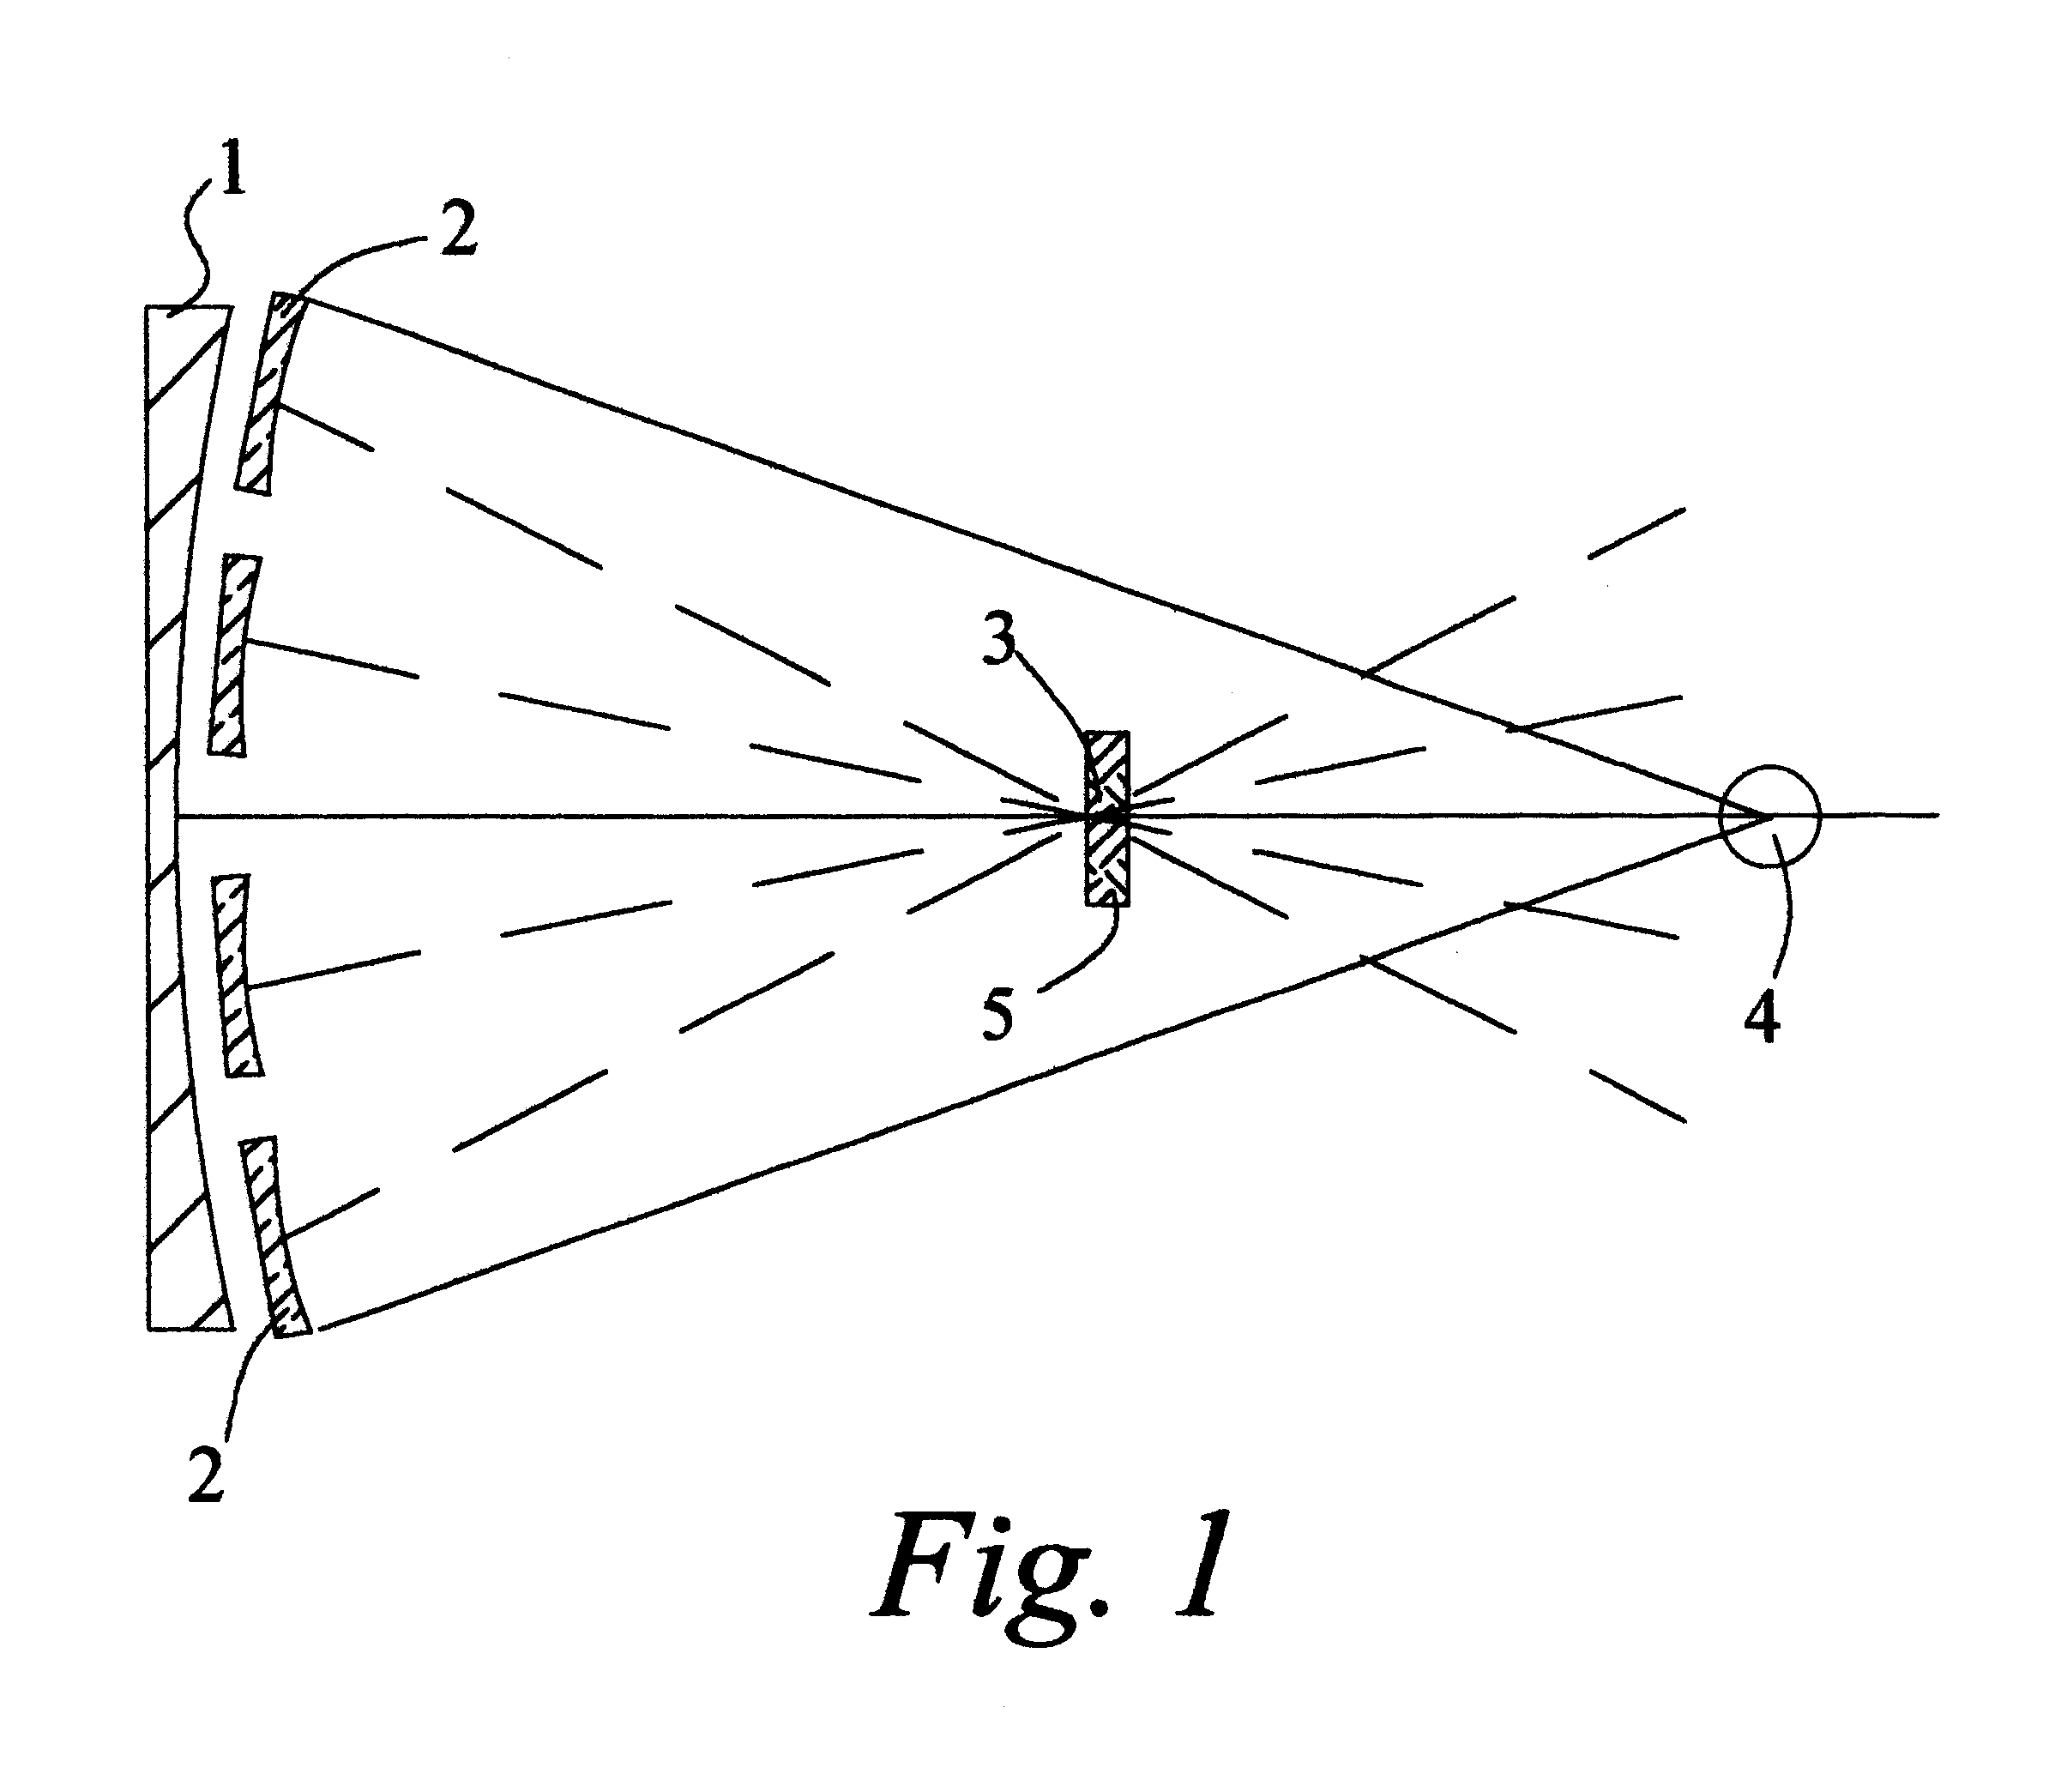 Multi-facet concentrator of solar setup for irradiating the objects placed in a target plane with solar light